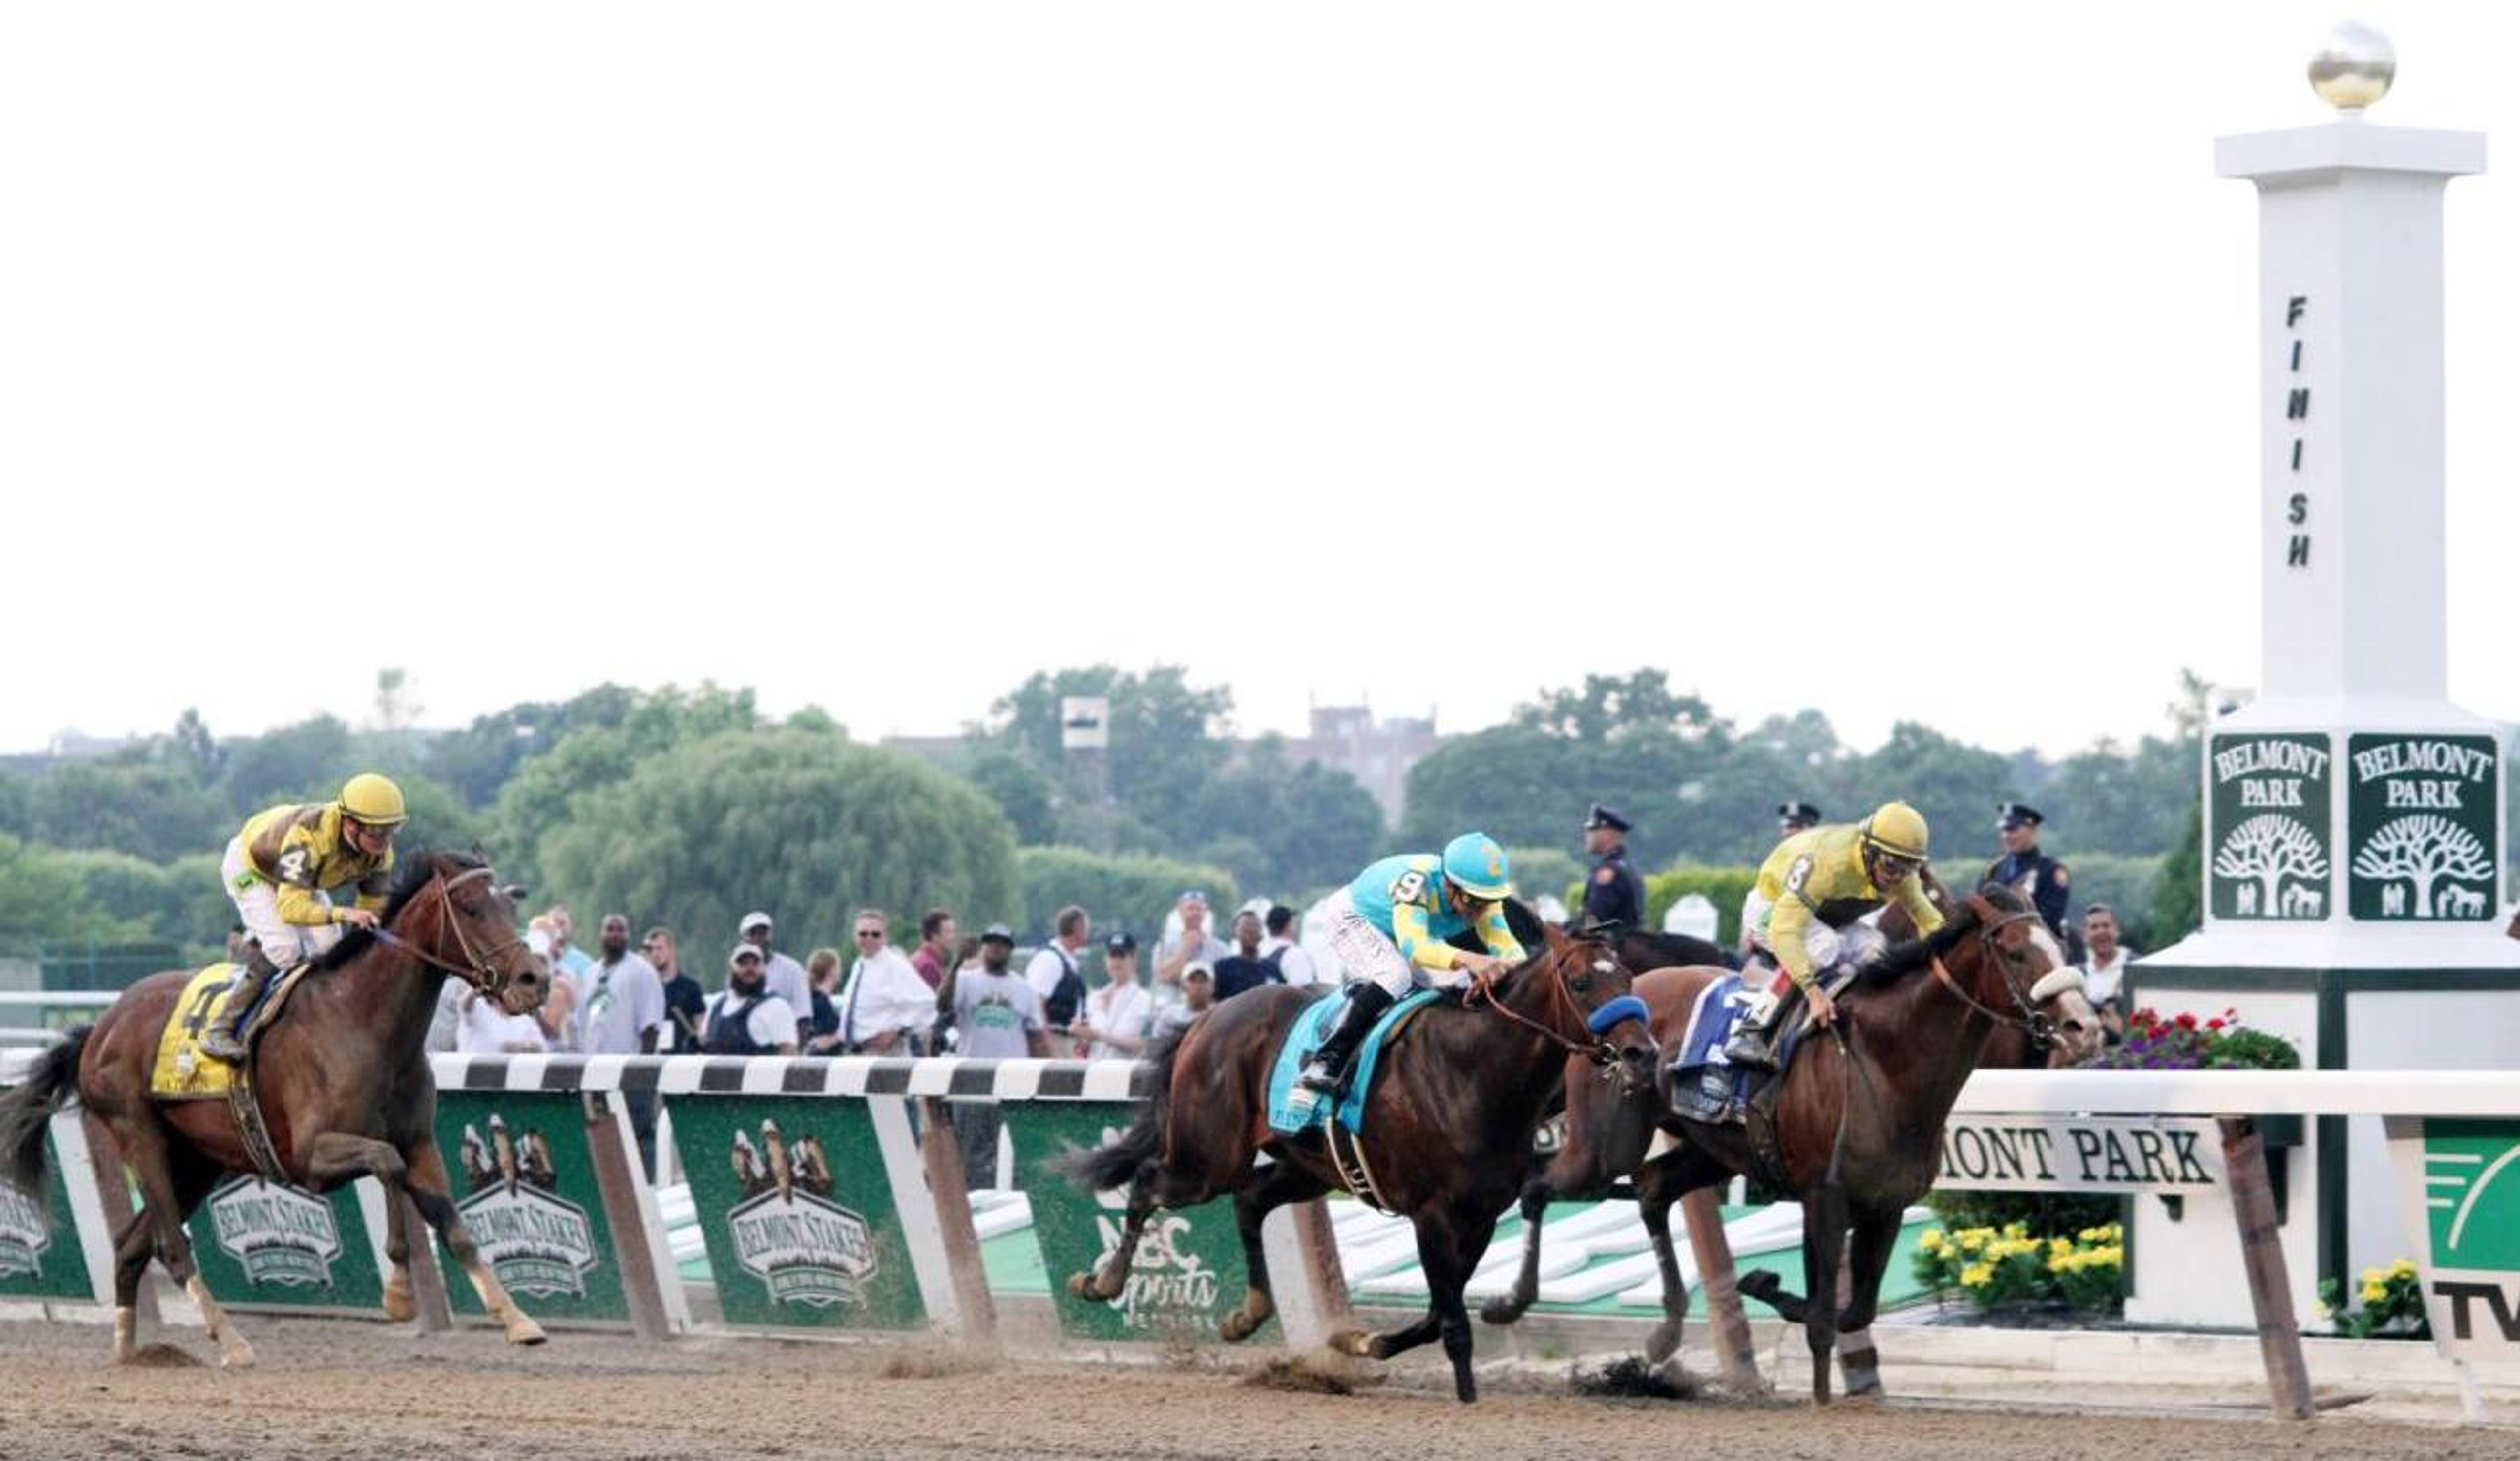 Belmont Stakes Preview: Can Rich Strike Take A Bite Out Of The Big Apple?